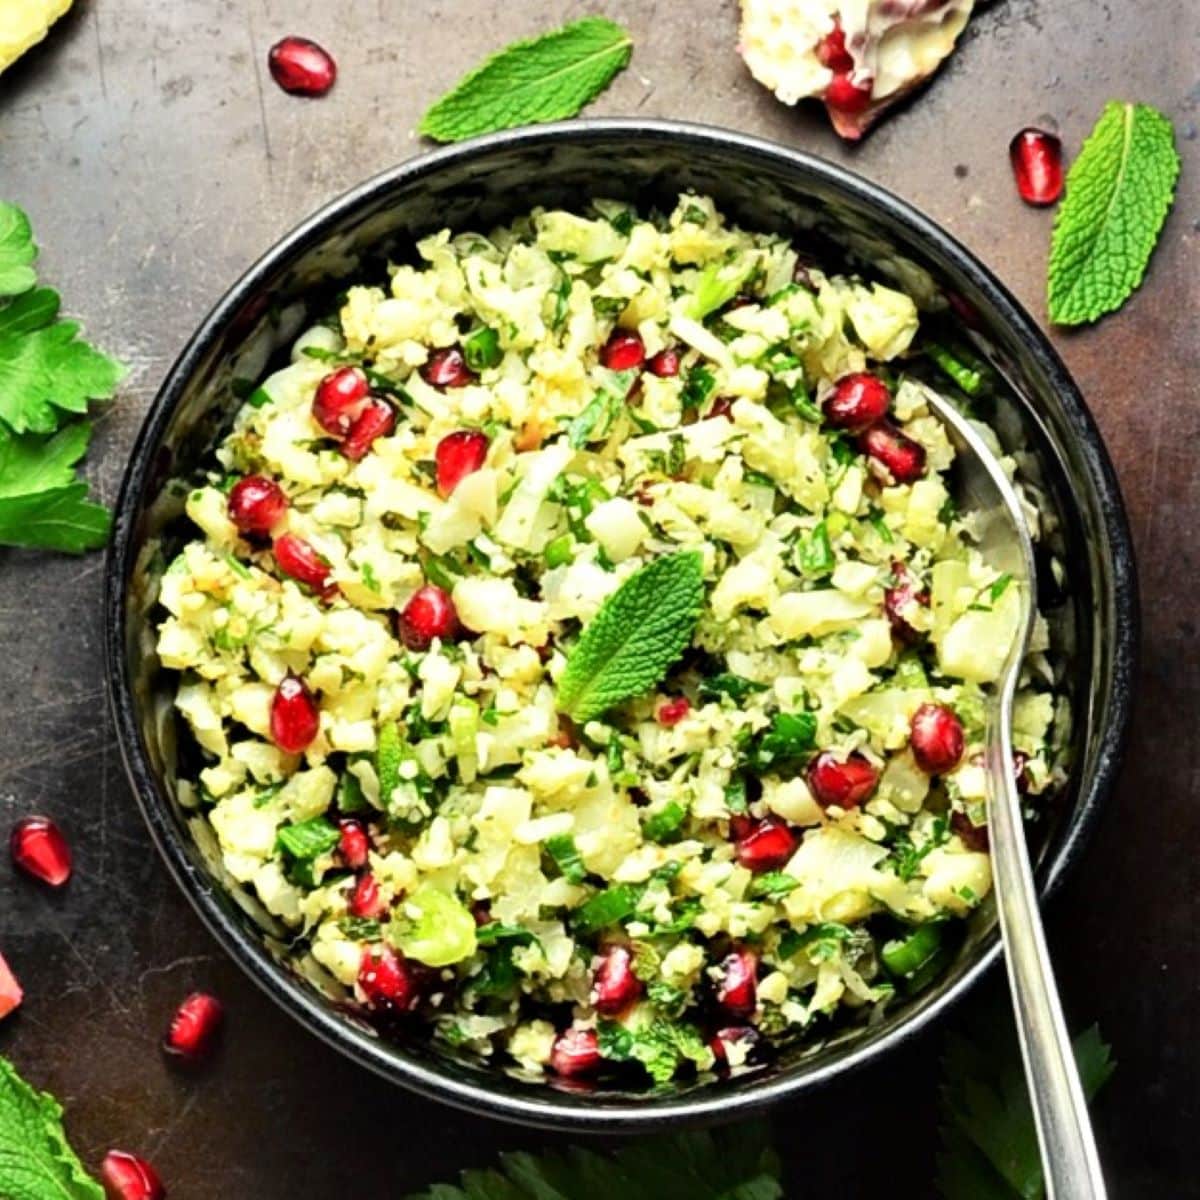 Cauliflower tabbouleh salad with herbs and pomegranate in black bowl with spoon.